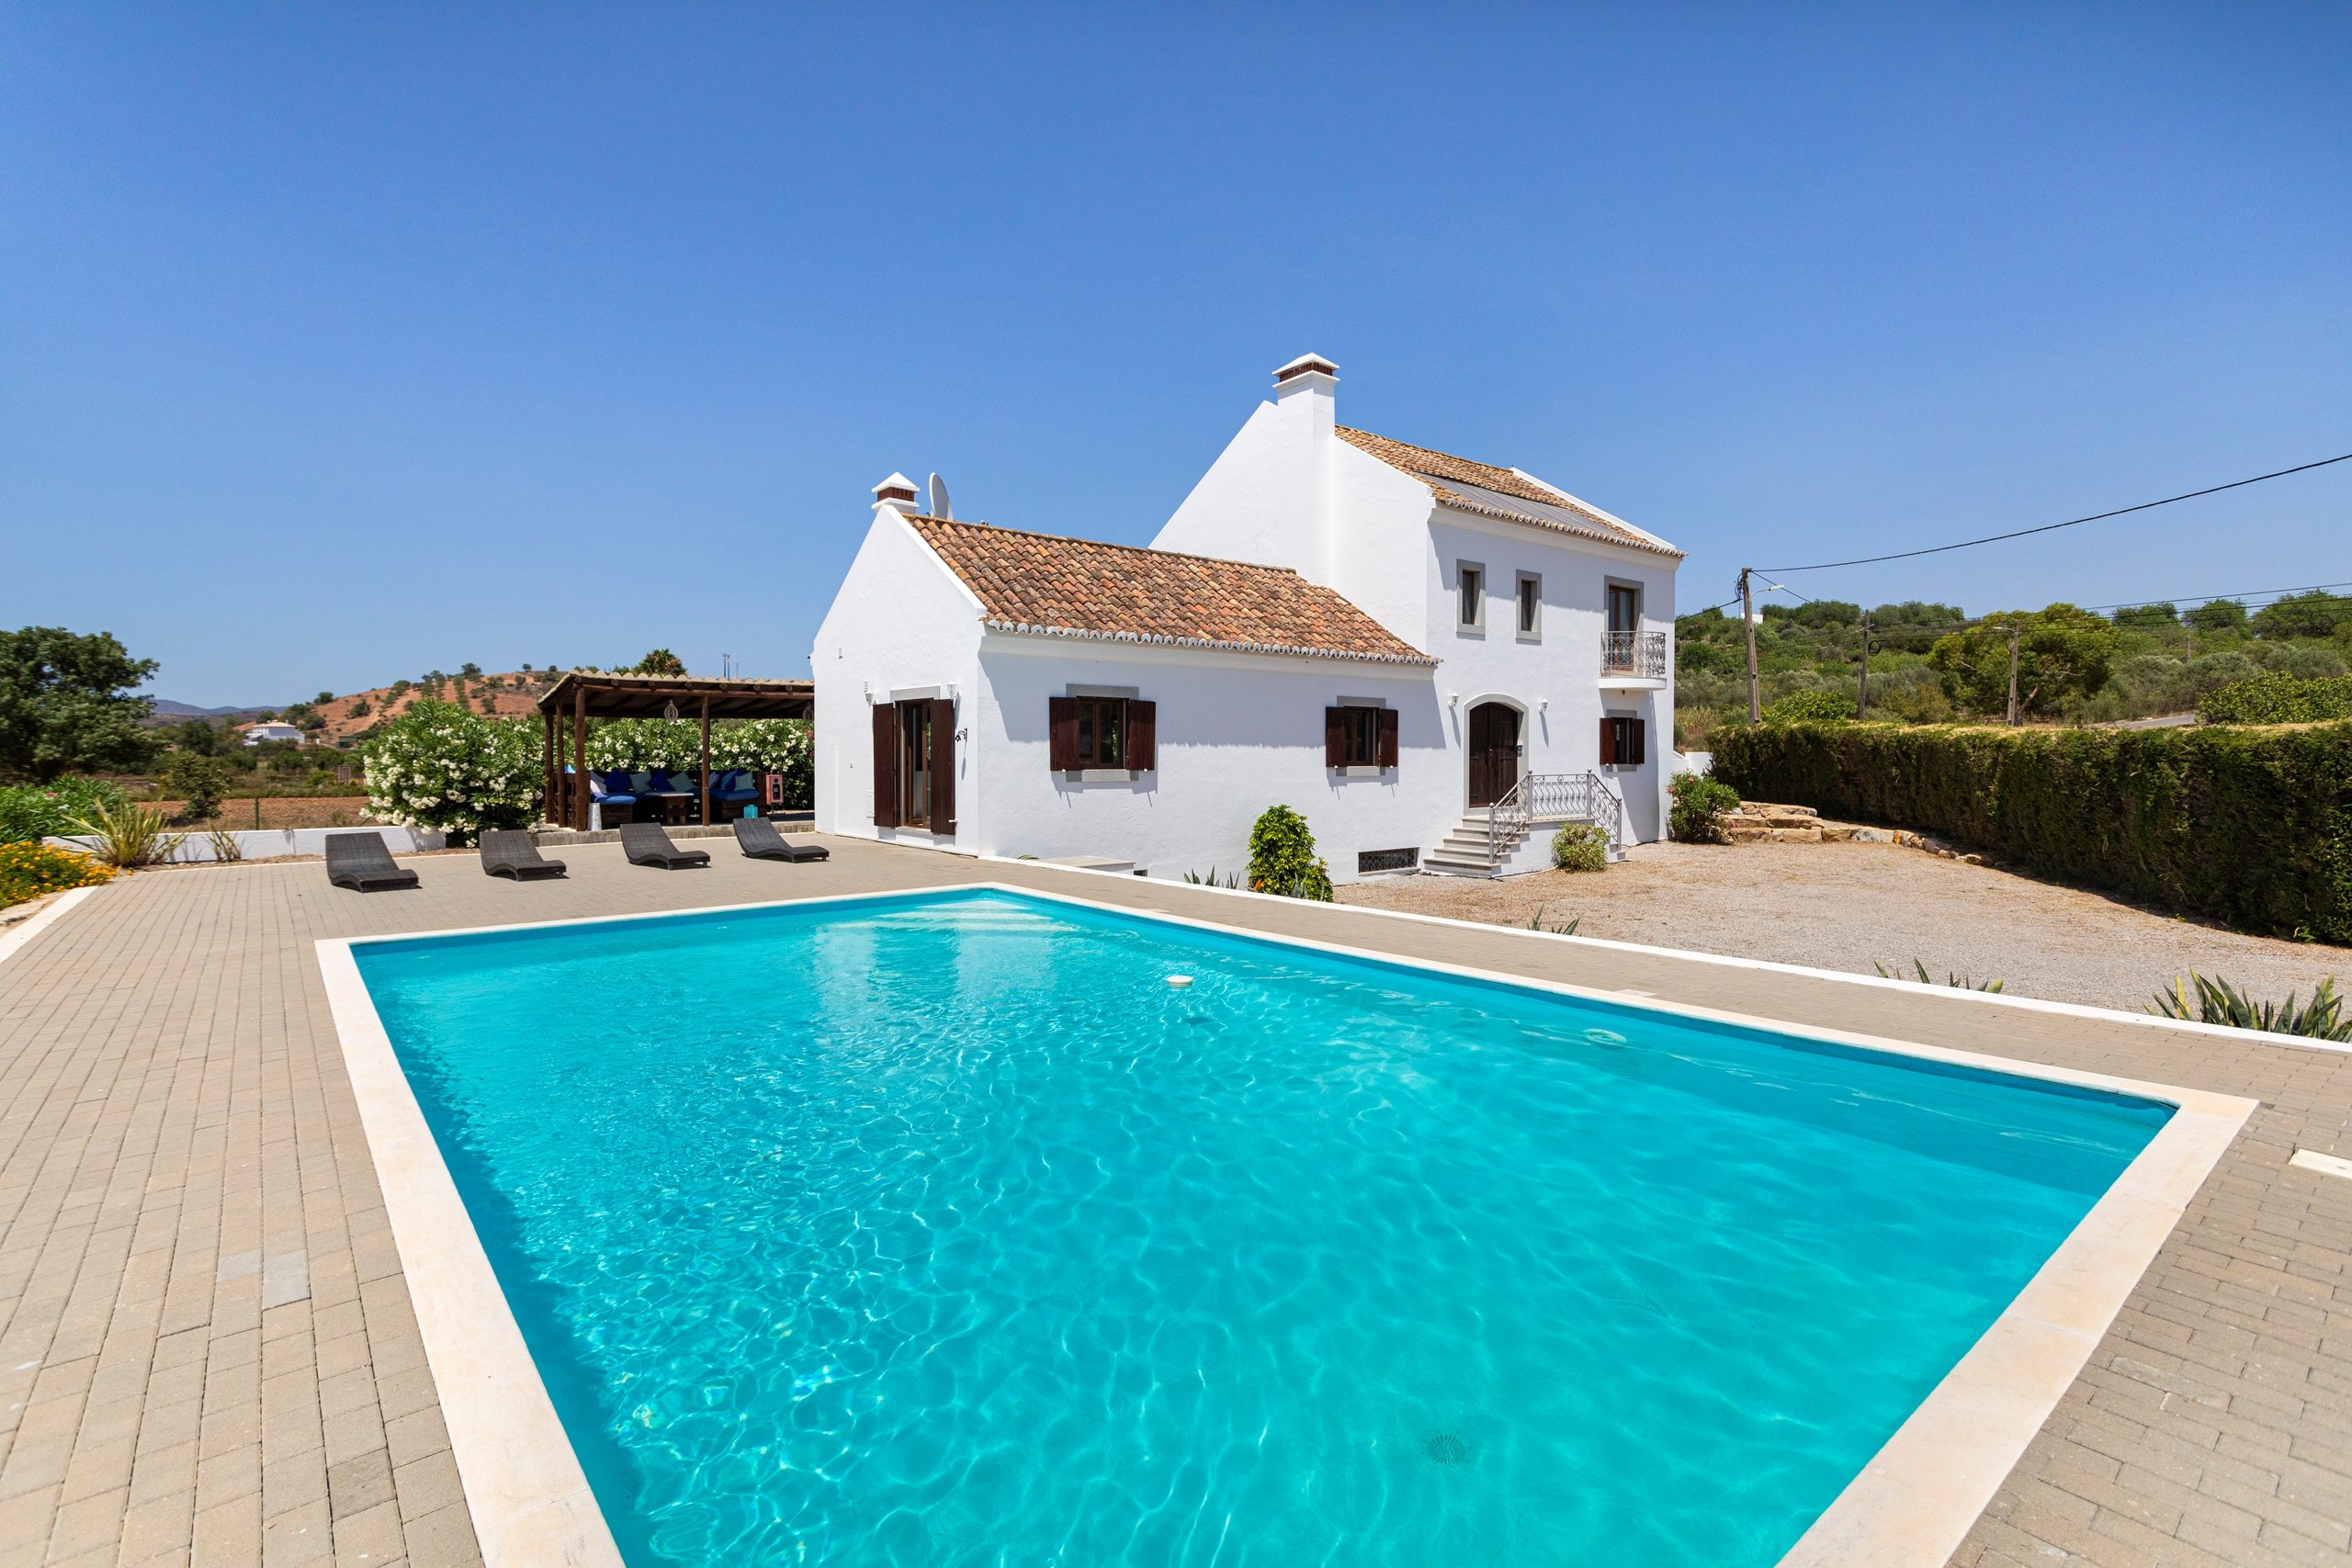 Close to Tavira, immaculate 4-bedroom villa with pool. Accommodation in Tavira